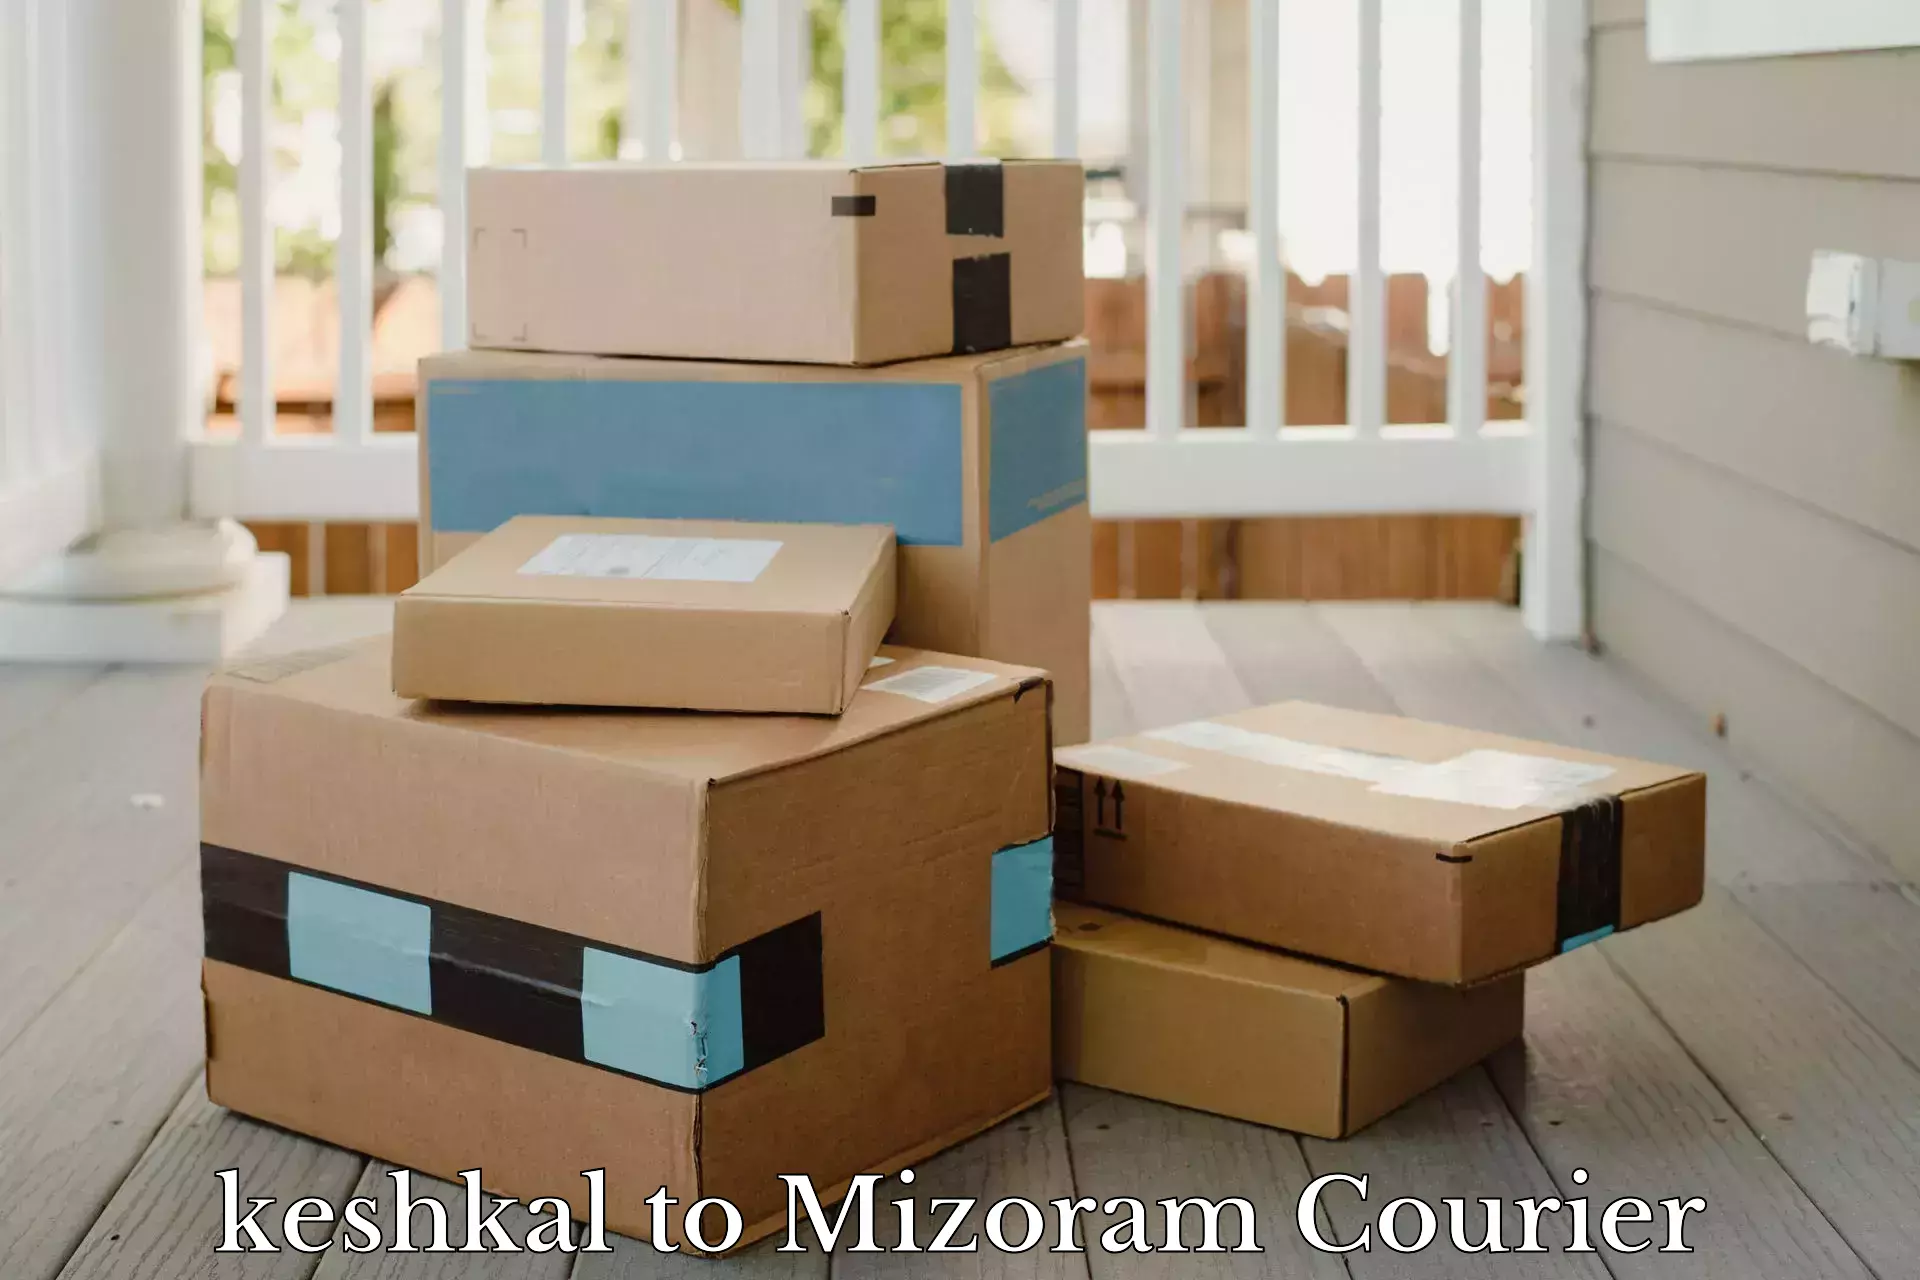 Professional courier handling keshkal to Siaha